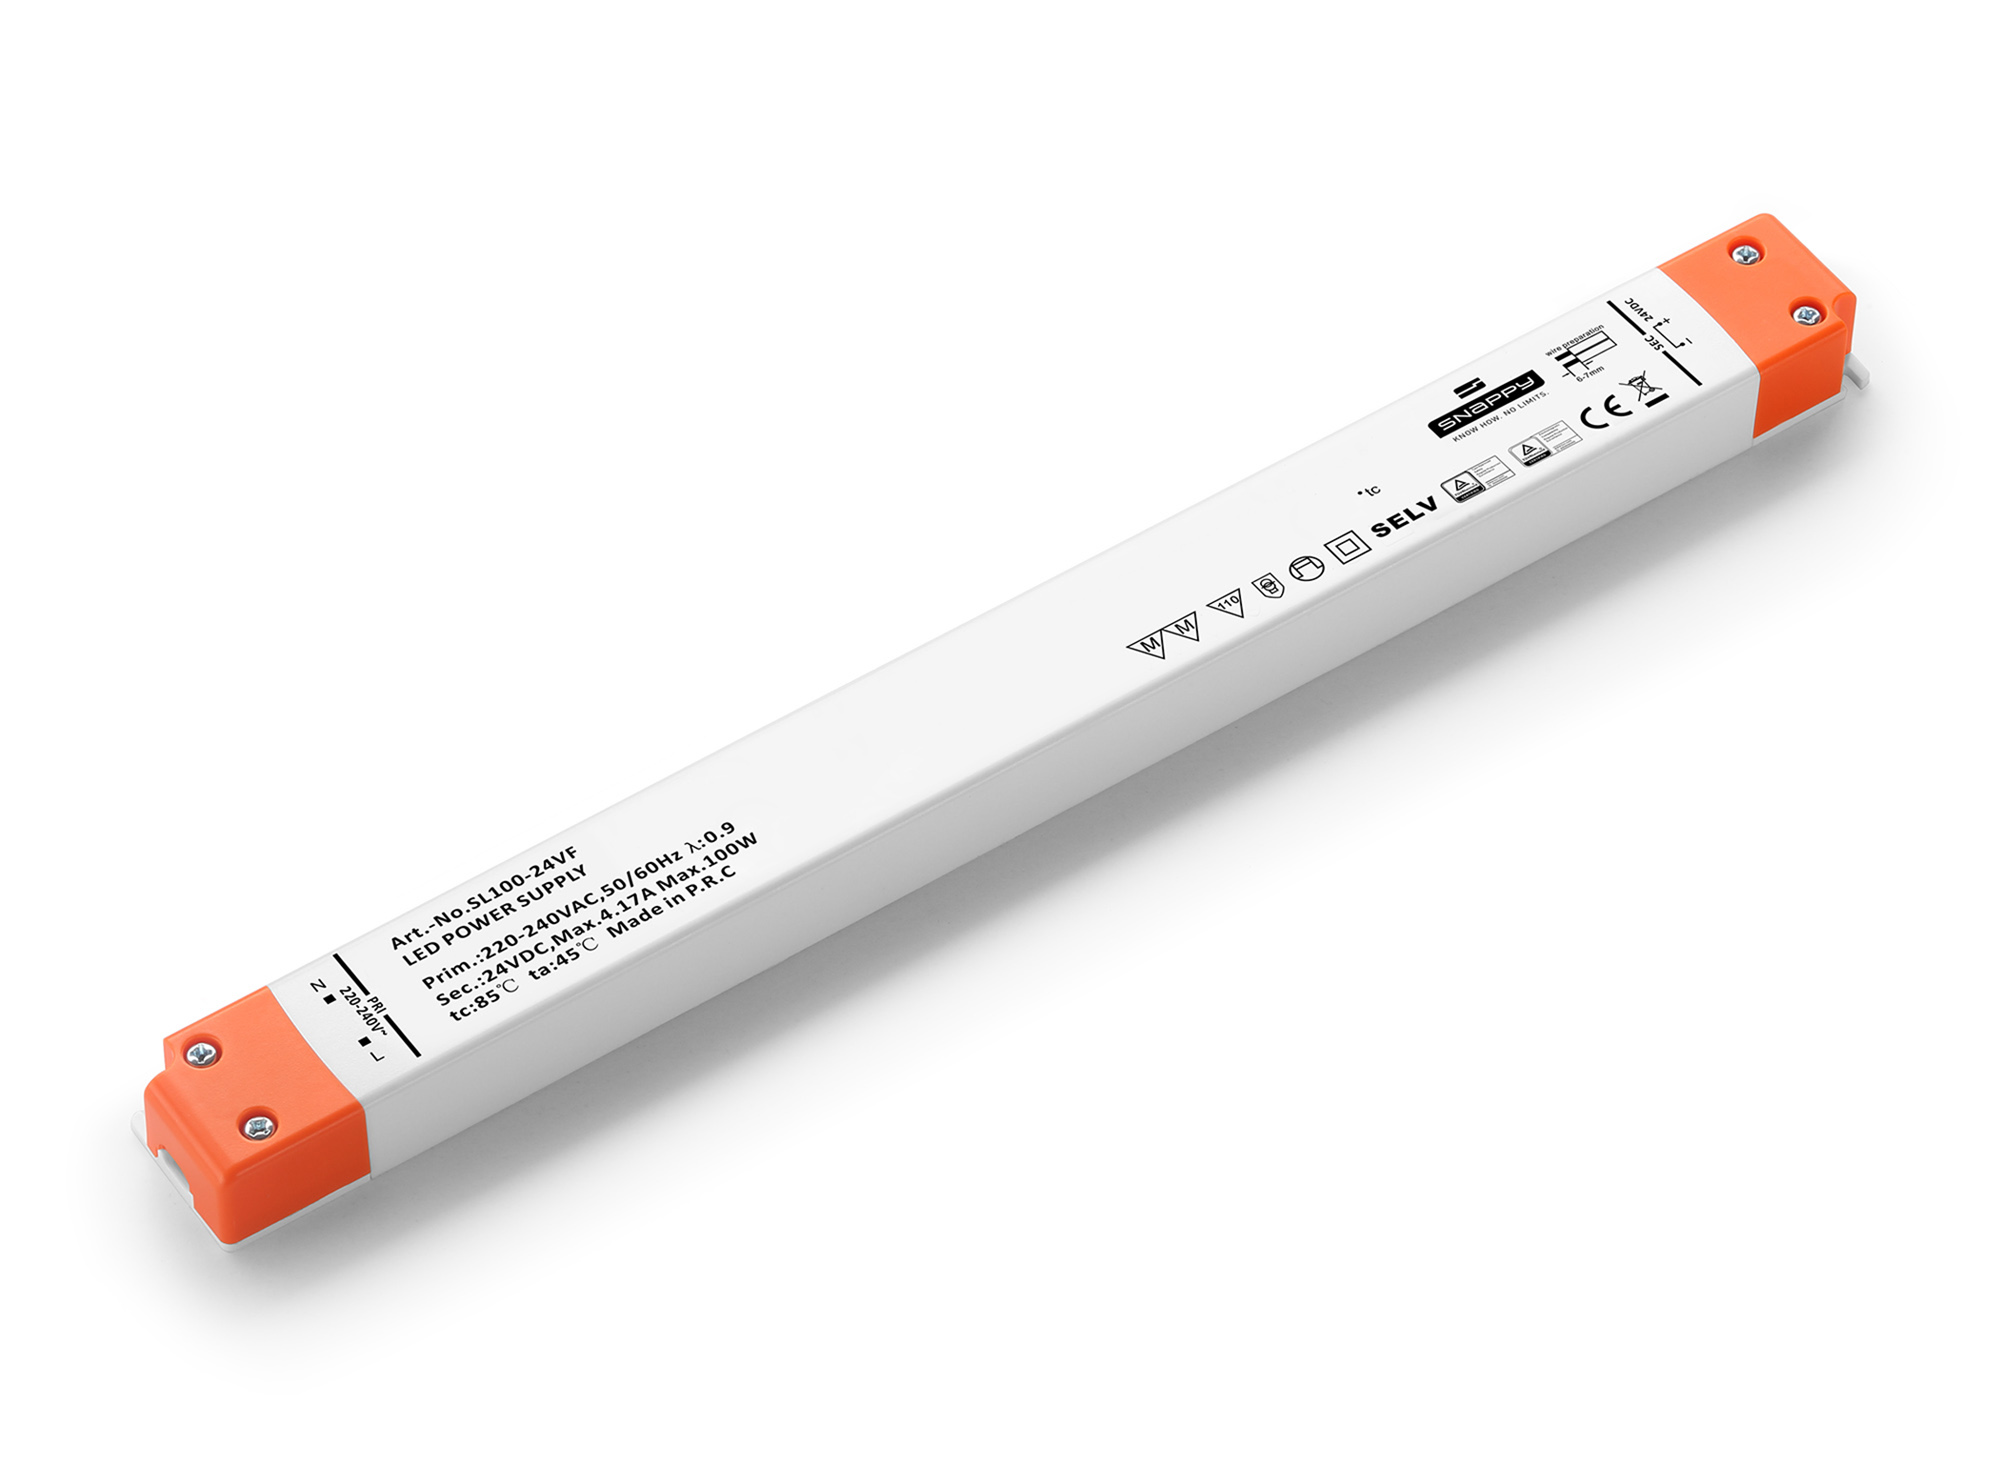 SL100-24VF  100W, Constant Voltage Non Dimmable LED Driver, 24VDC, 4.16A, Input 200-240VAC 50/60Hz, IP20.